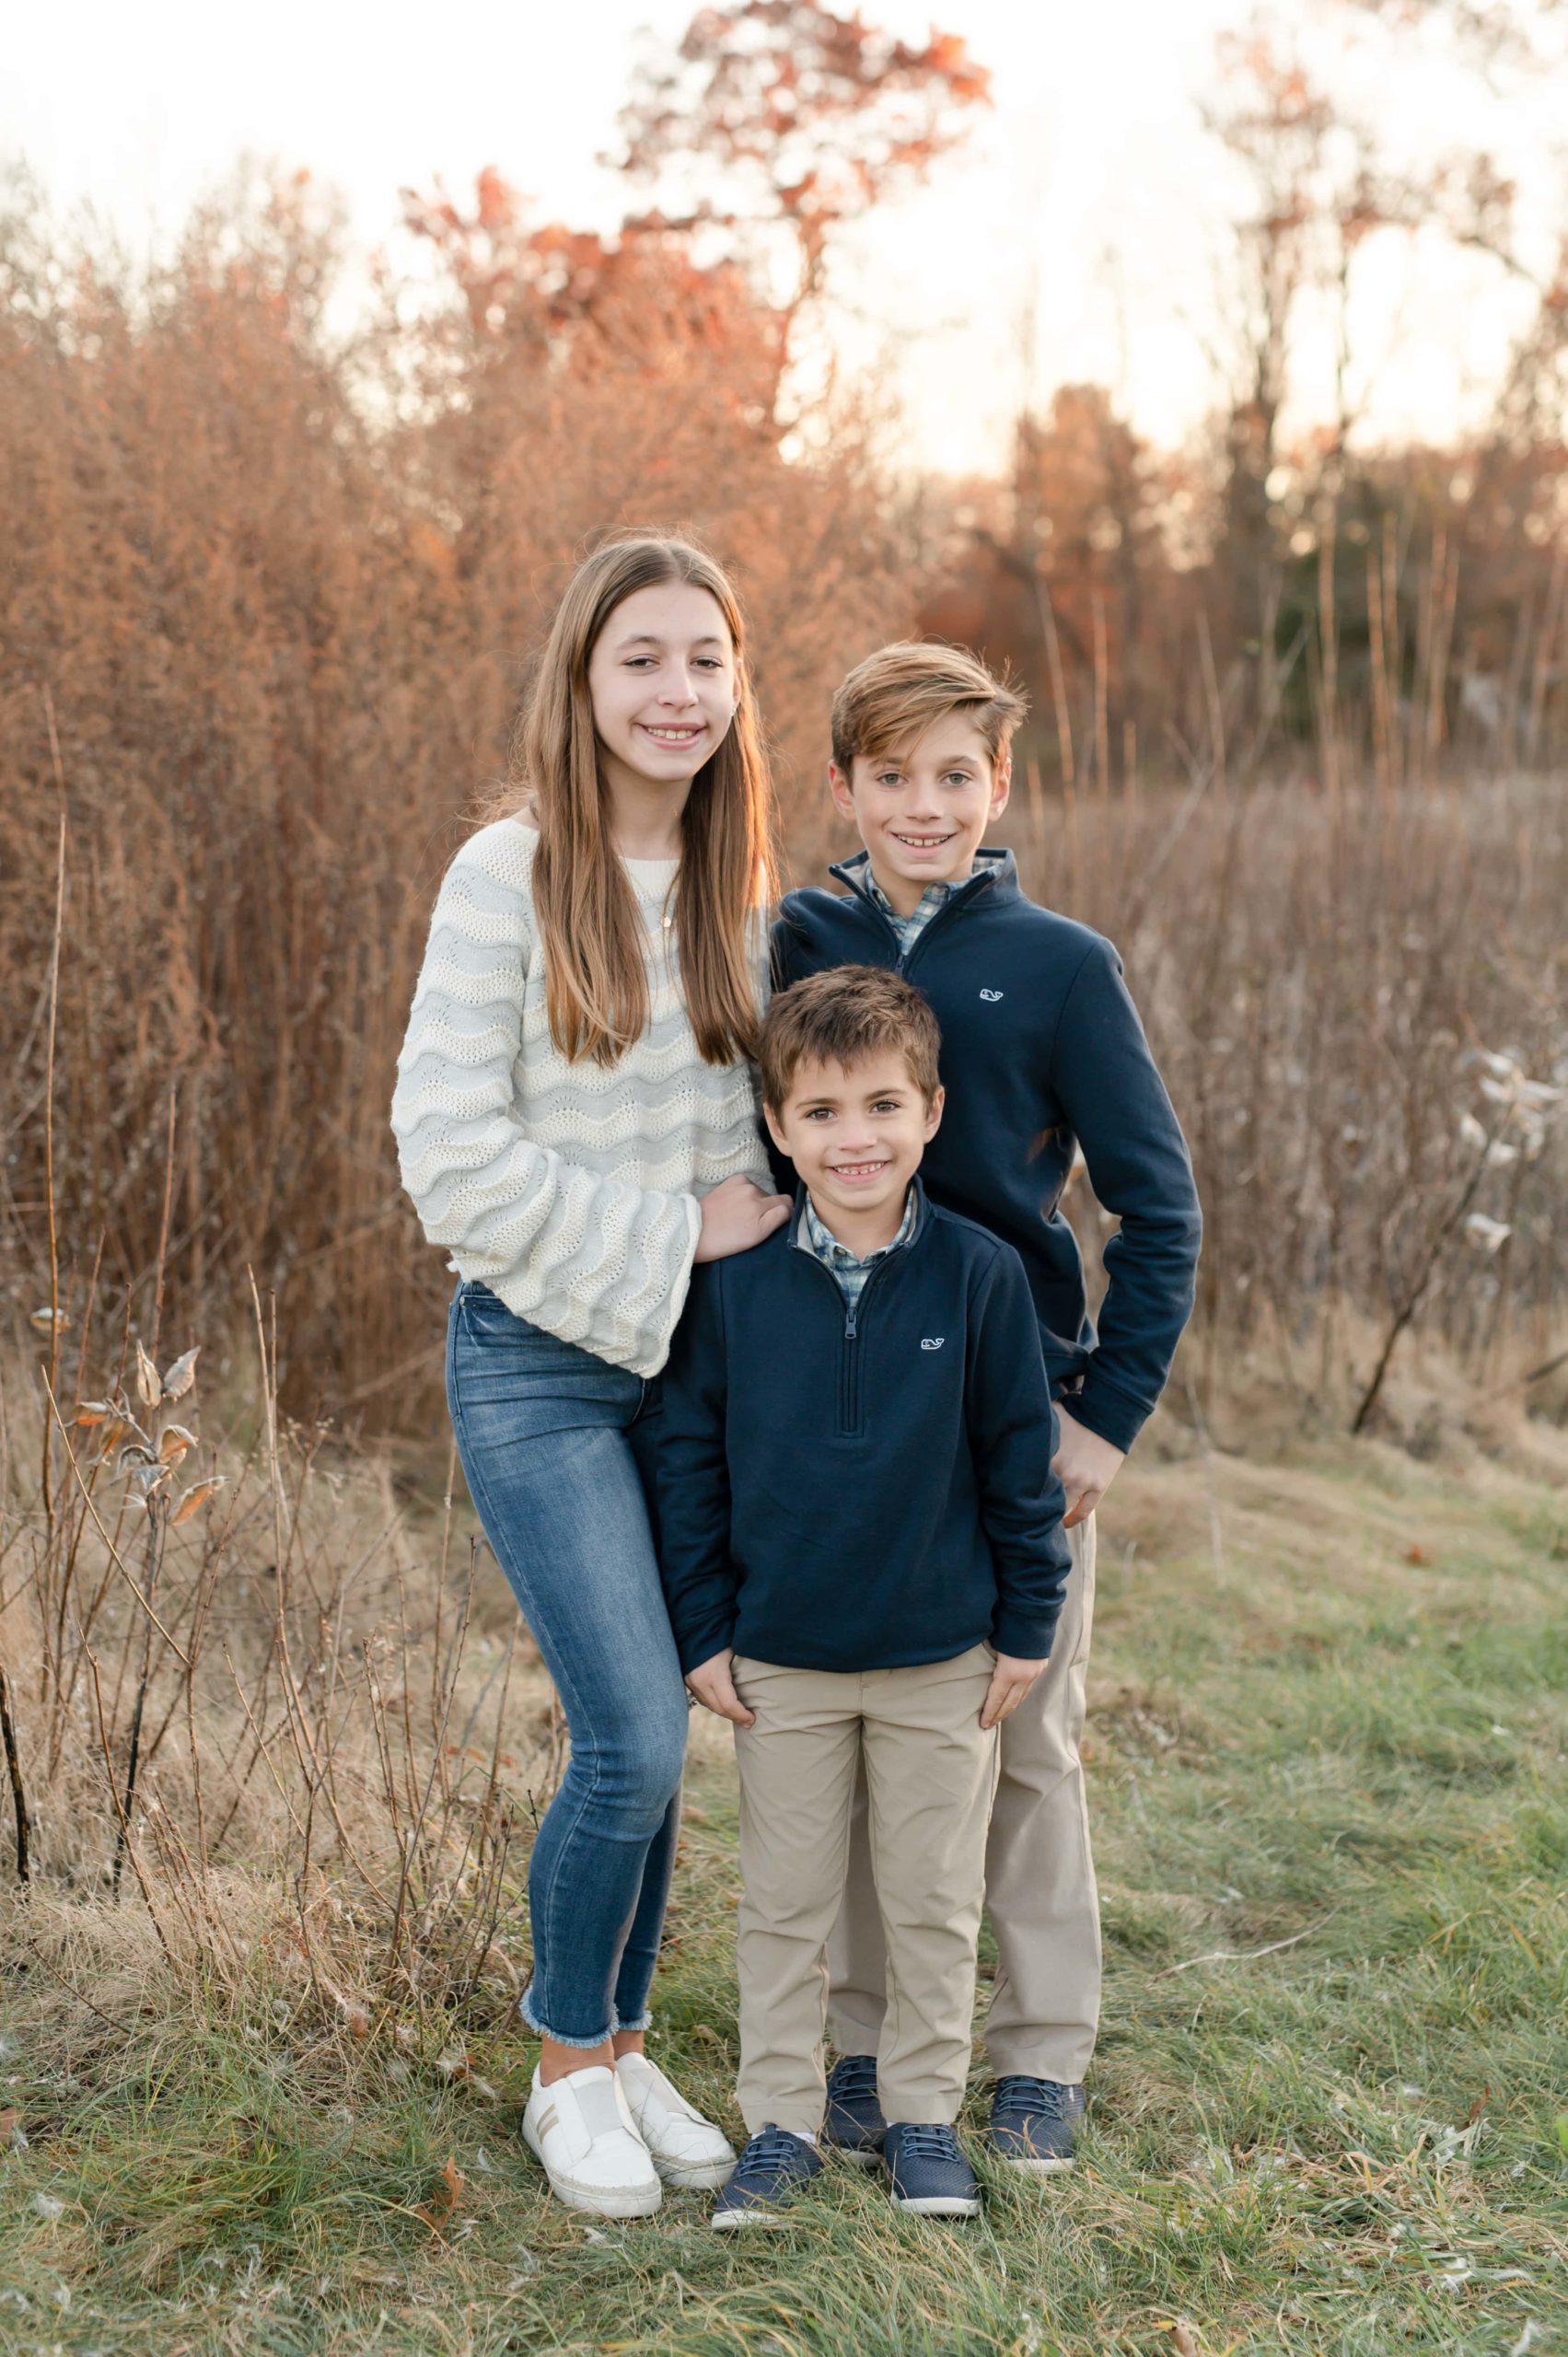 Sibling photos in fall with matching navy outfits